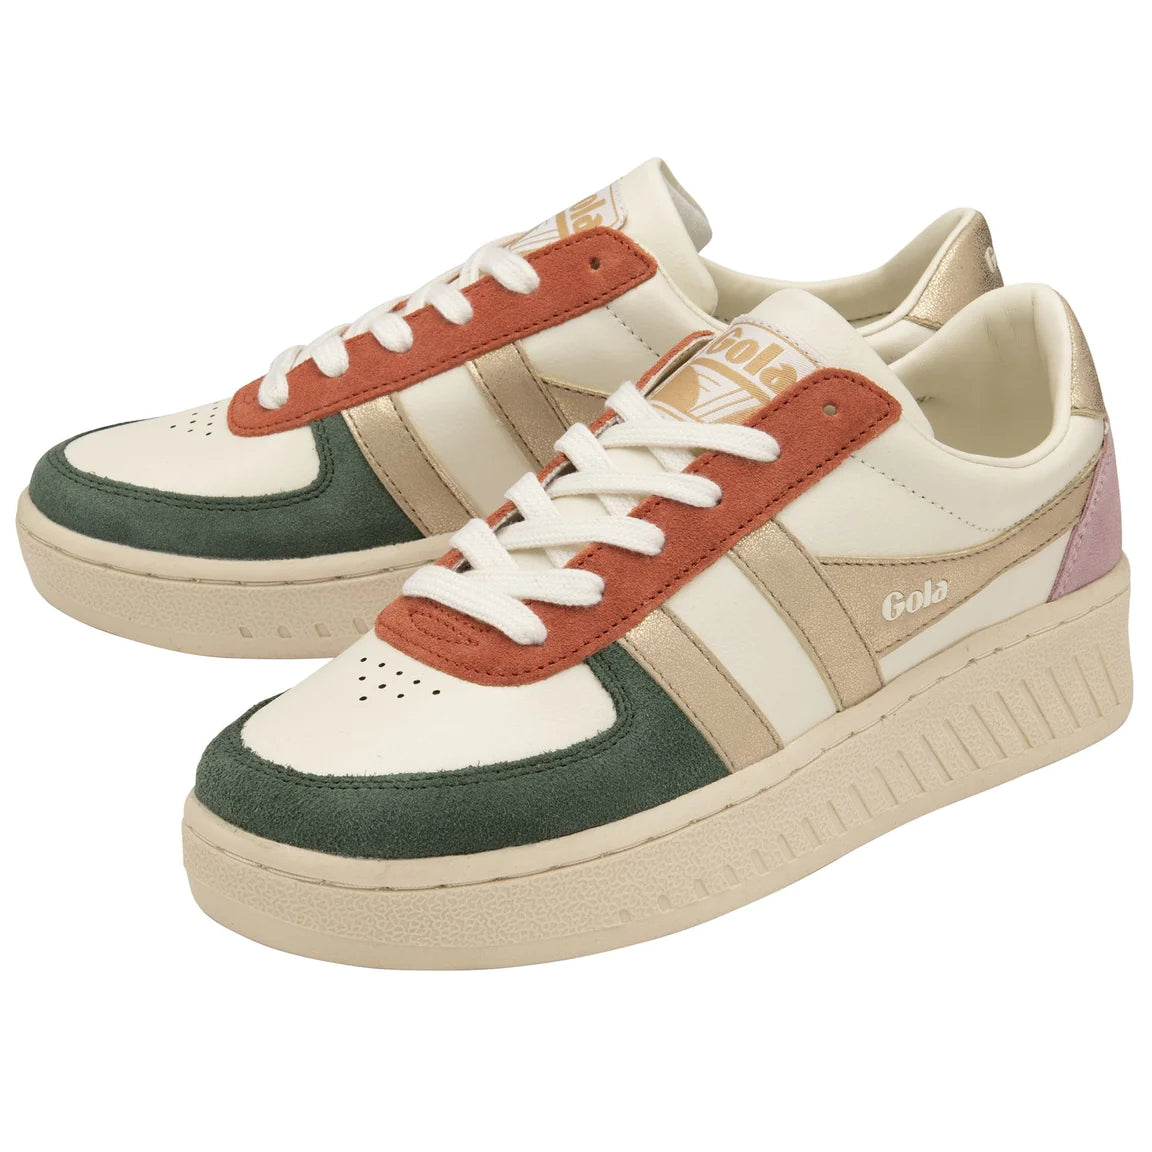 Grandslam Quadrant Sneakers in Off White/Sage/Gold/Pastel Pink